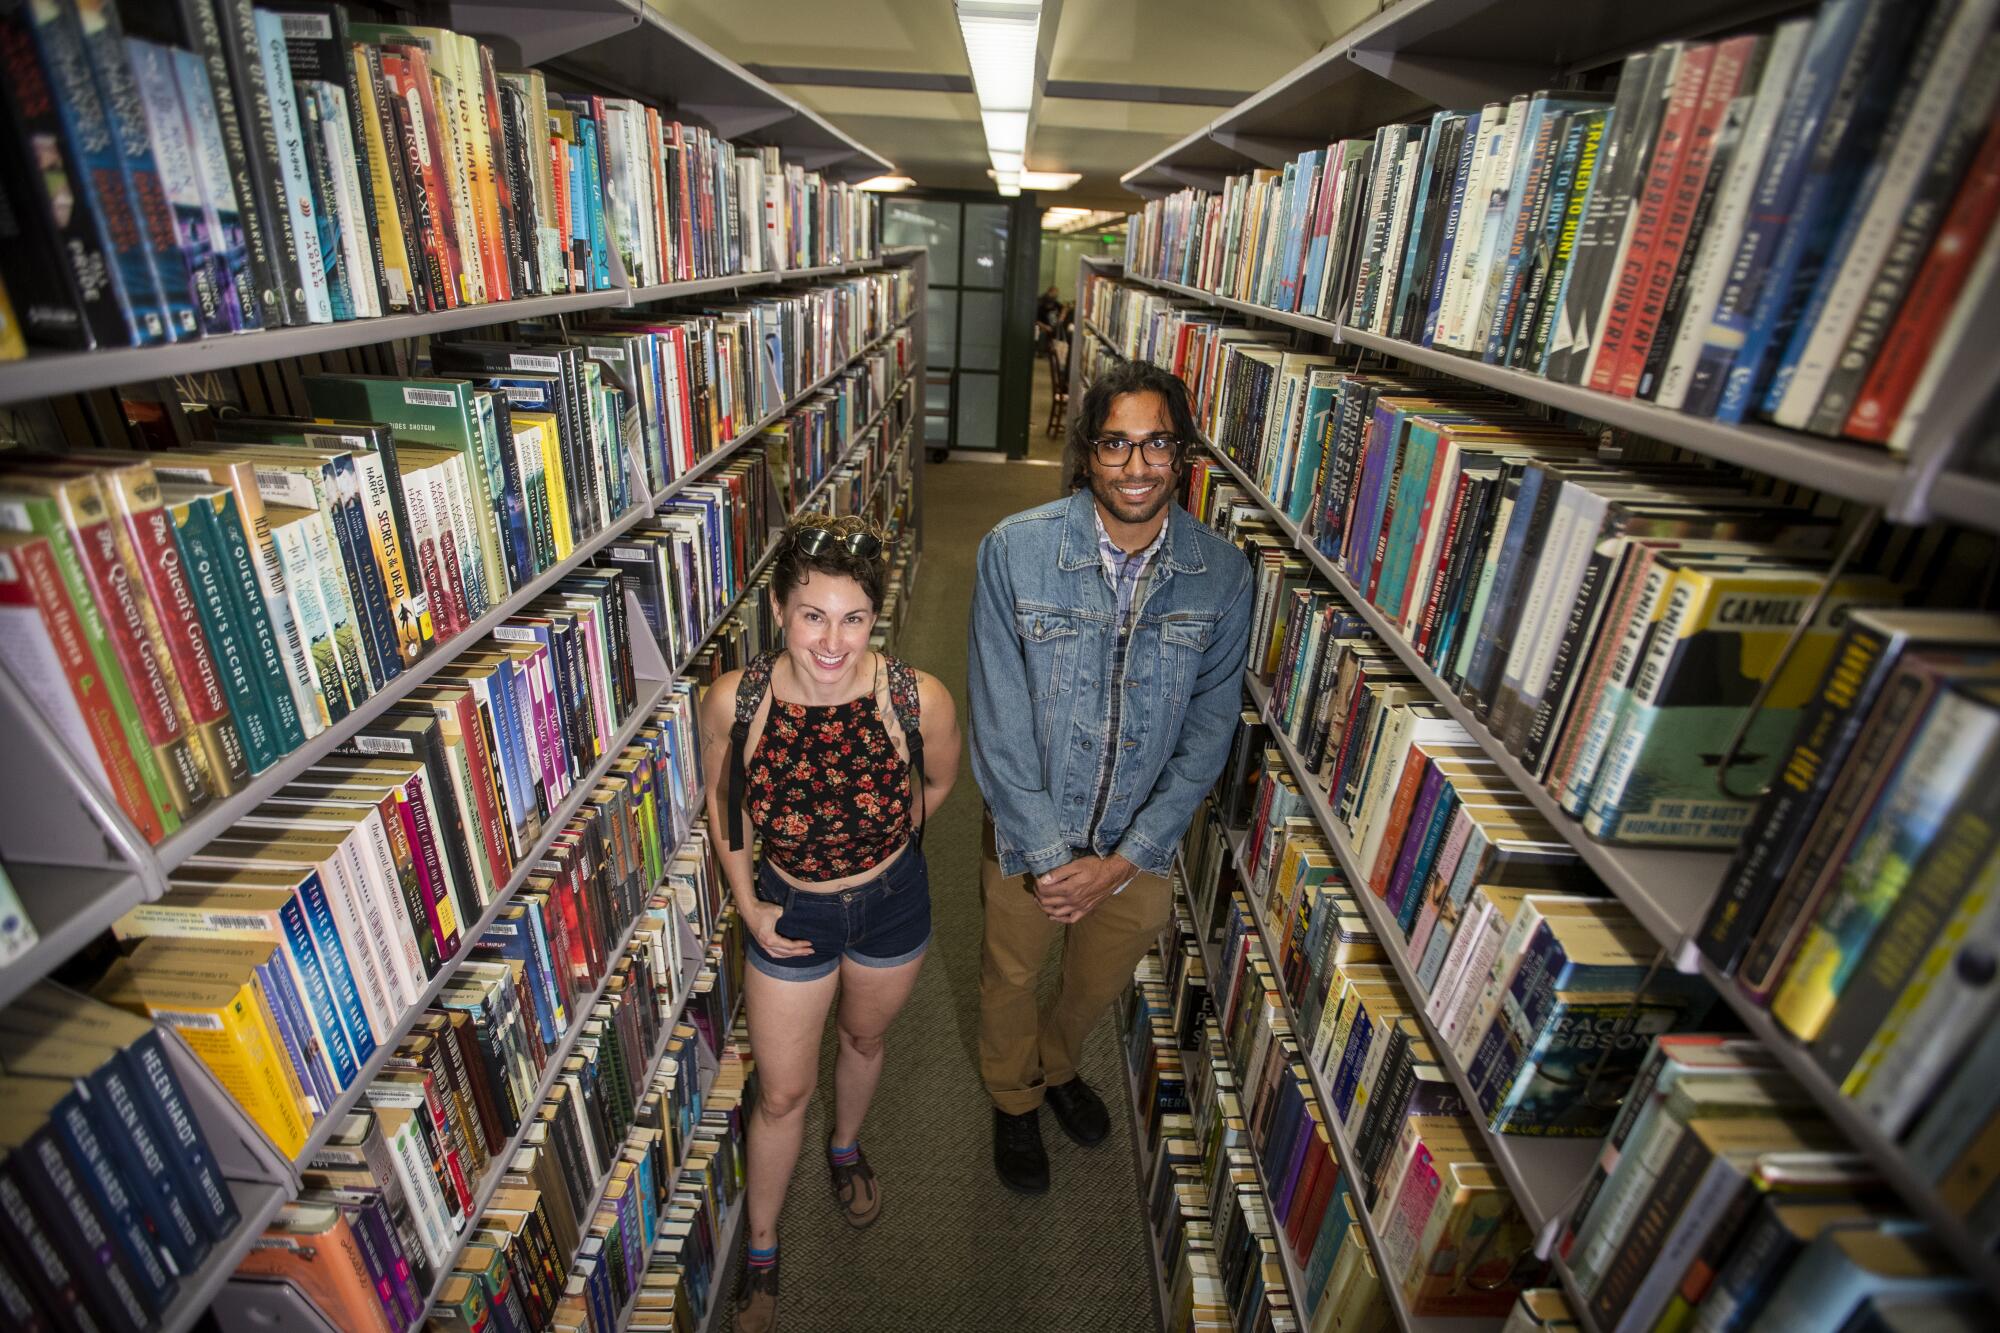 A man and a woman smile amid rows of books in a library.